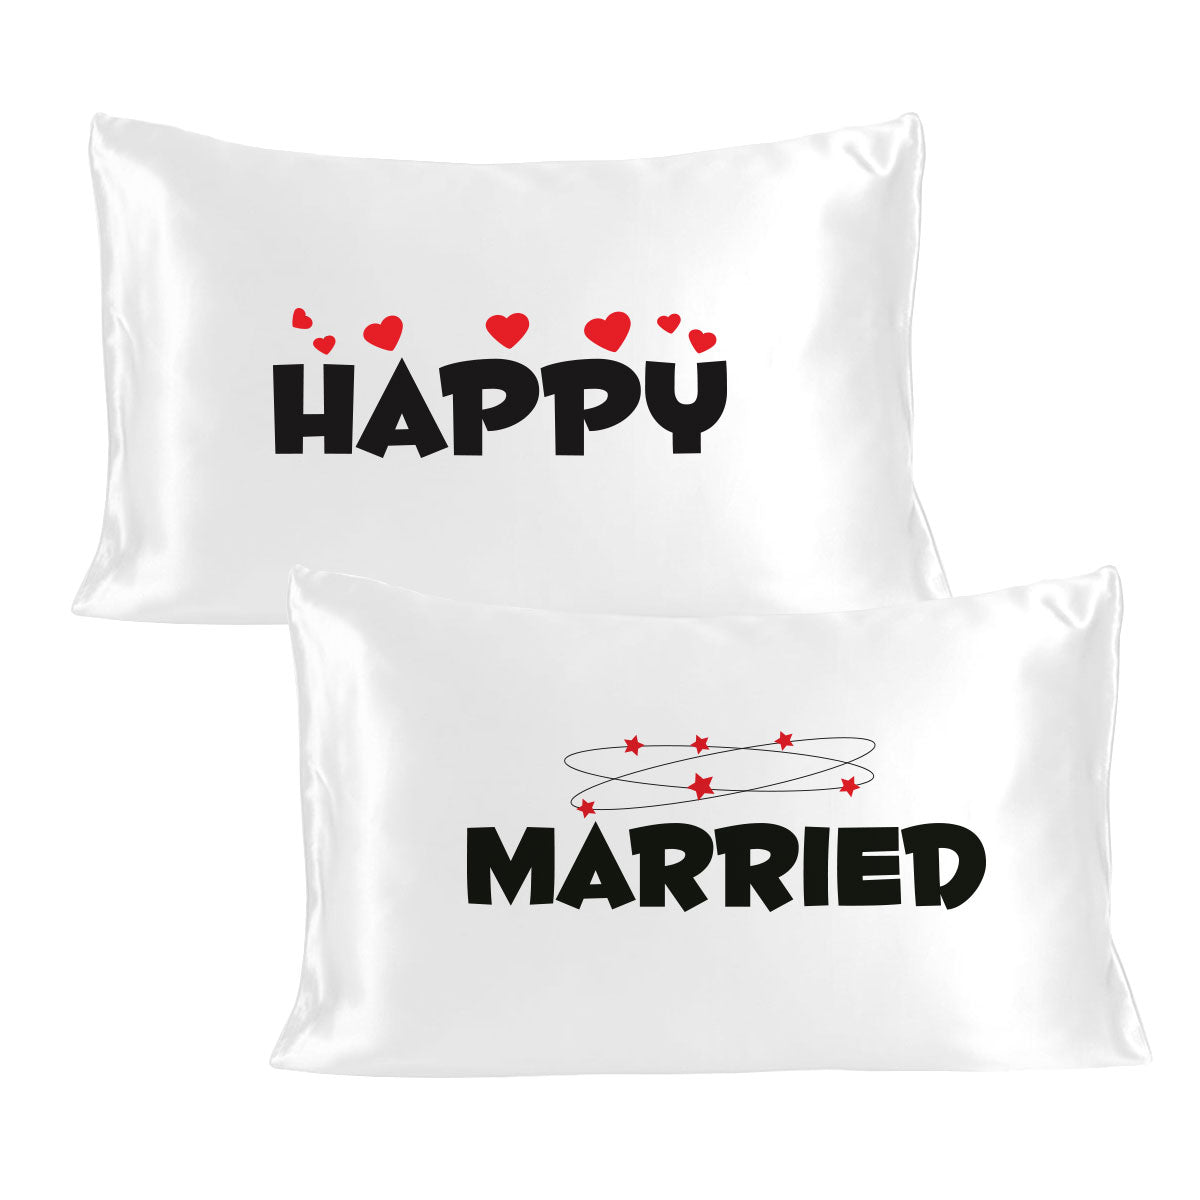 White Satin Silky Pillow Covers Set, Luxury Soft, Smooth Feel with Love Messages from "Happy Married" Stoa Paris Pillow Tok Collection